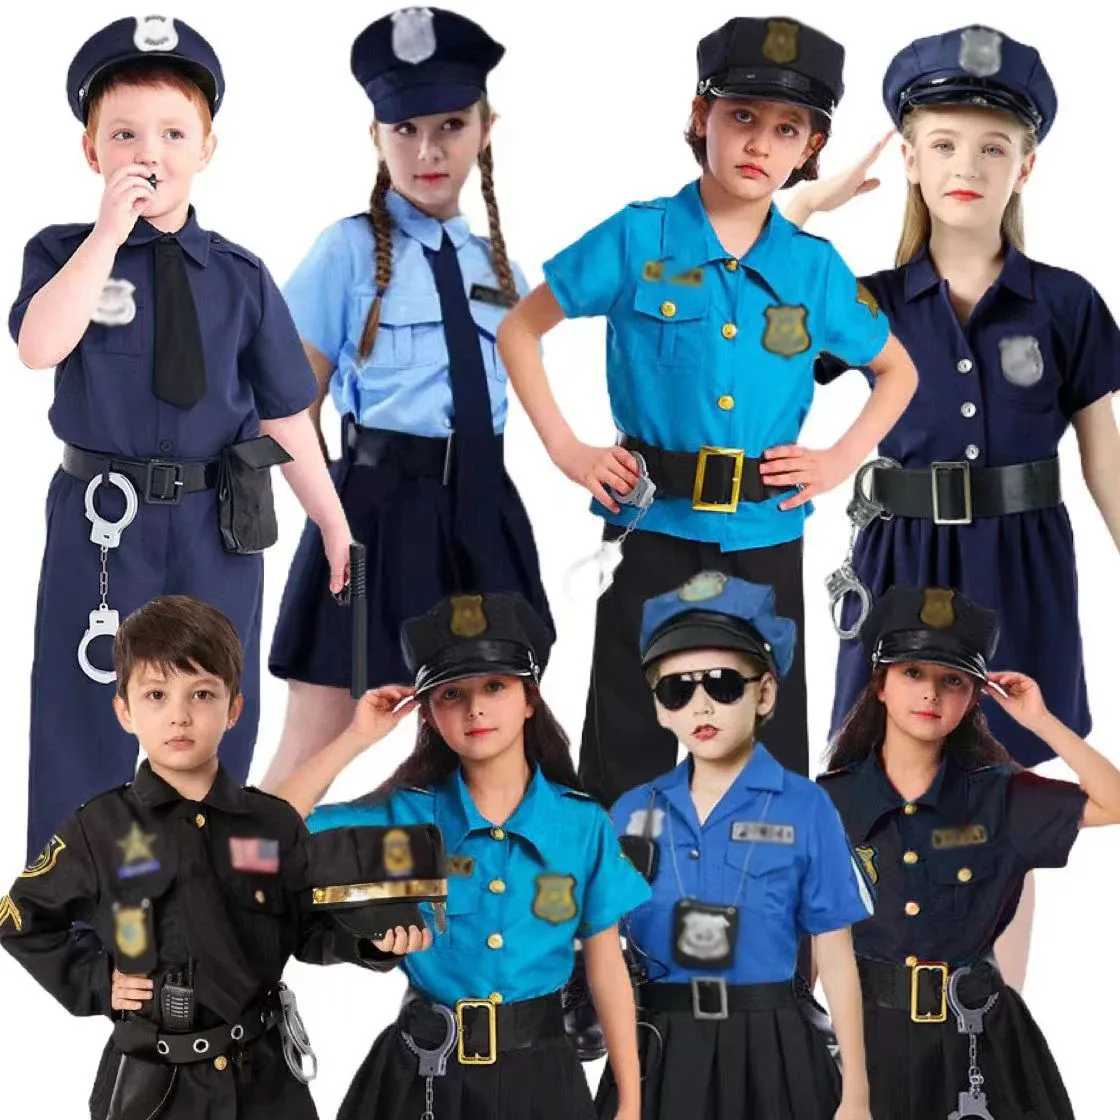 Halloween Anime-Style Police Uniforms for Kids for Boys and Girls for Performing at Drag Ball Party Costumes